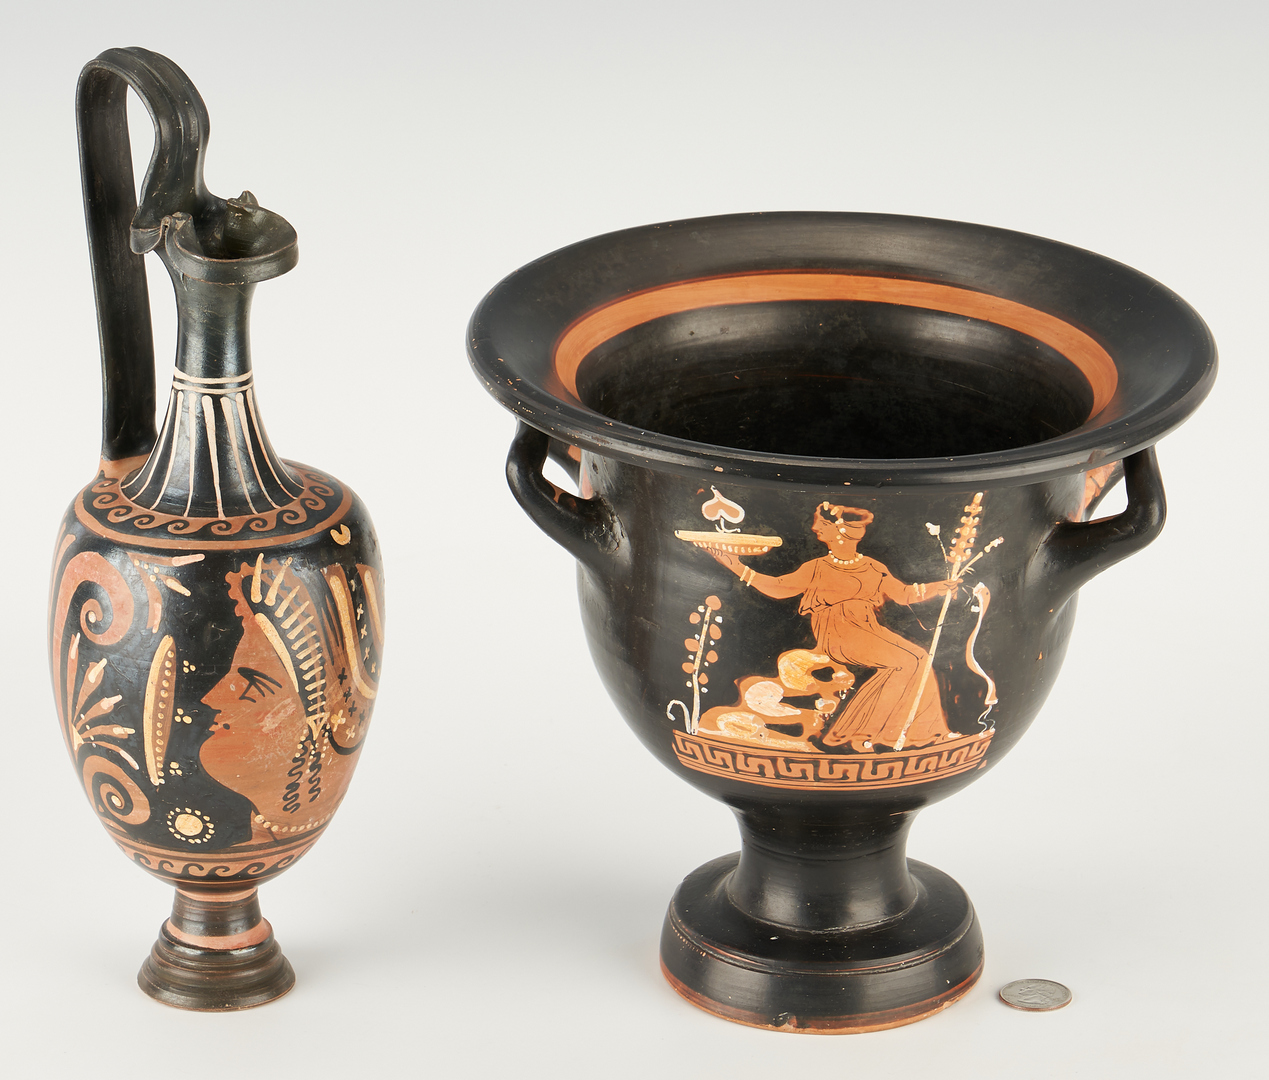 Lot 697: 2 Ancient Greek Red-Figure Pottery Vessels, ex-Royal Athena Galleries